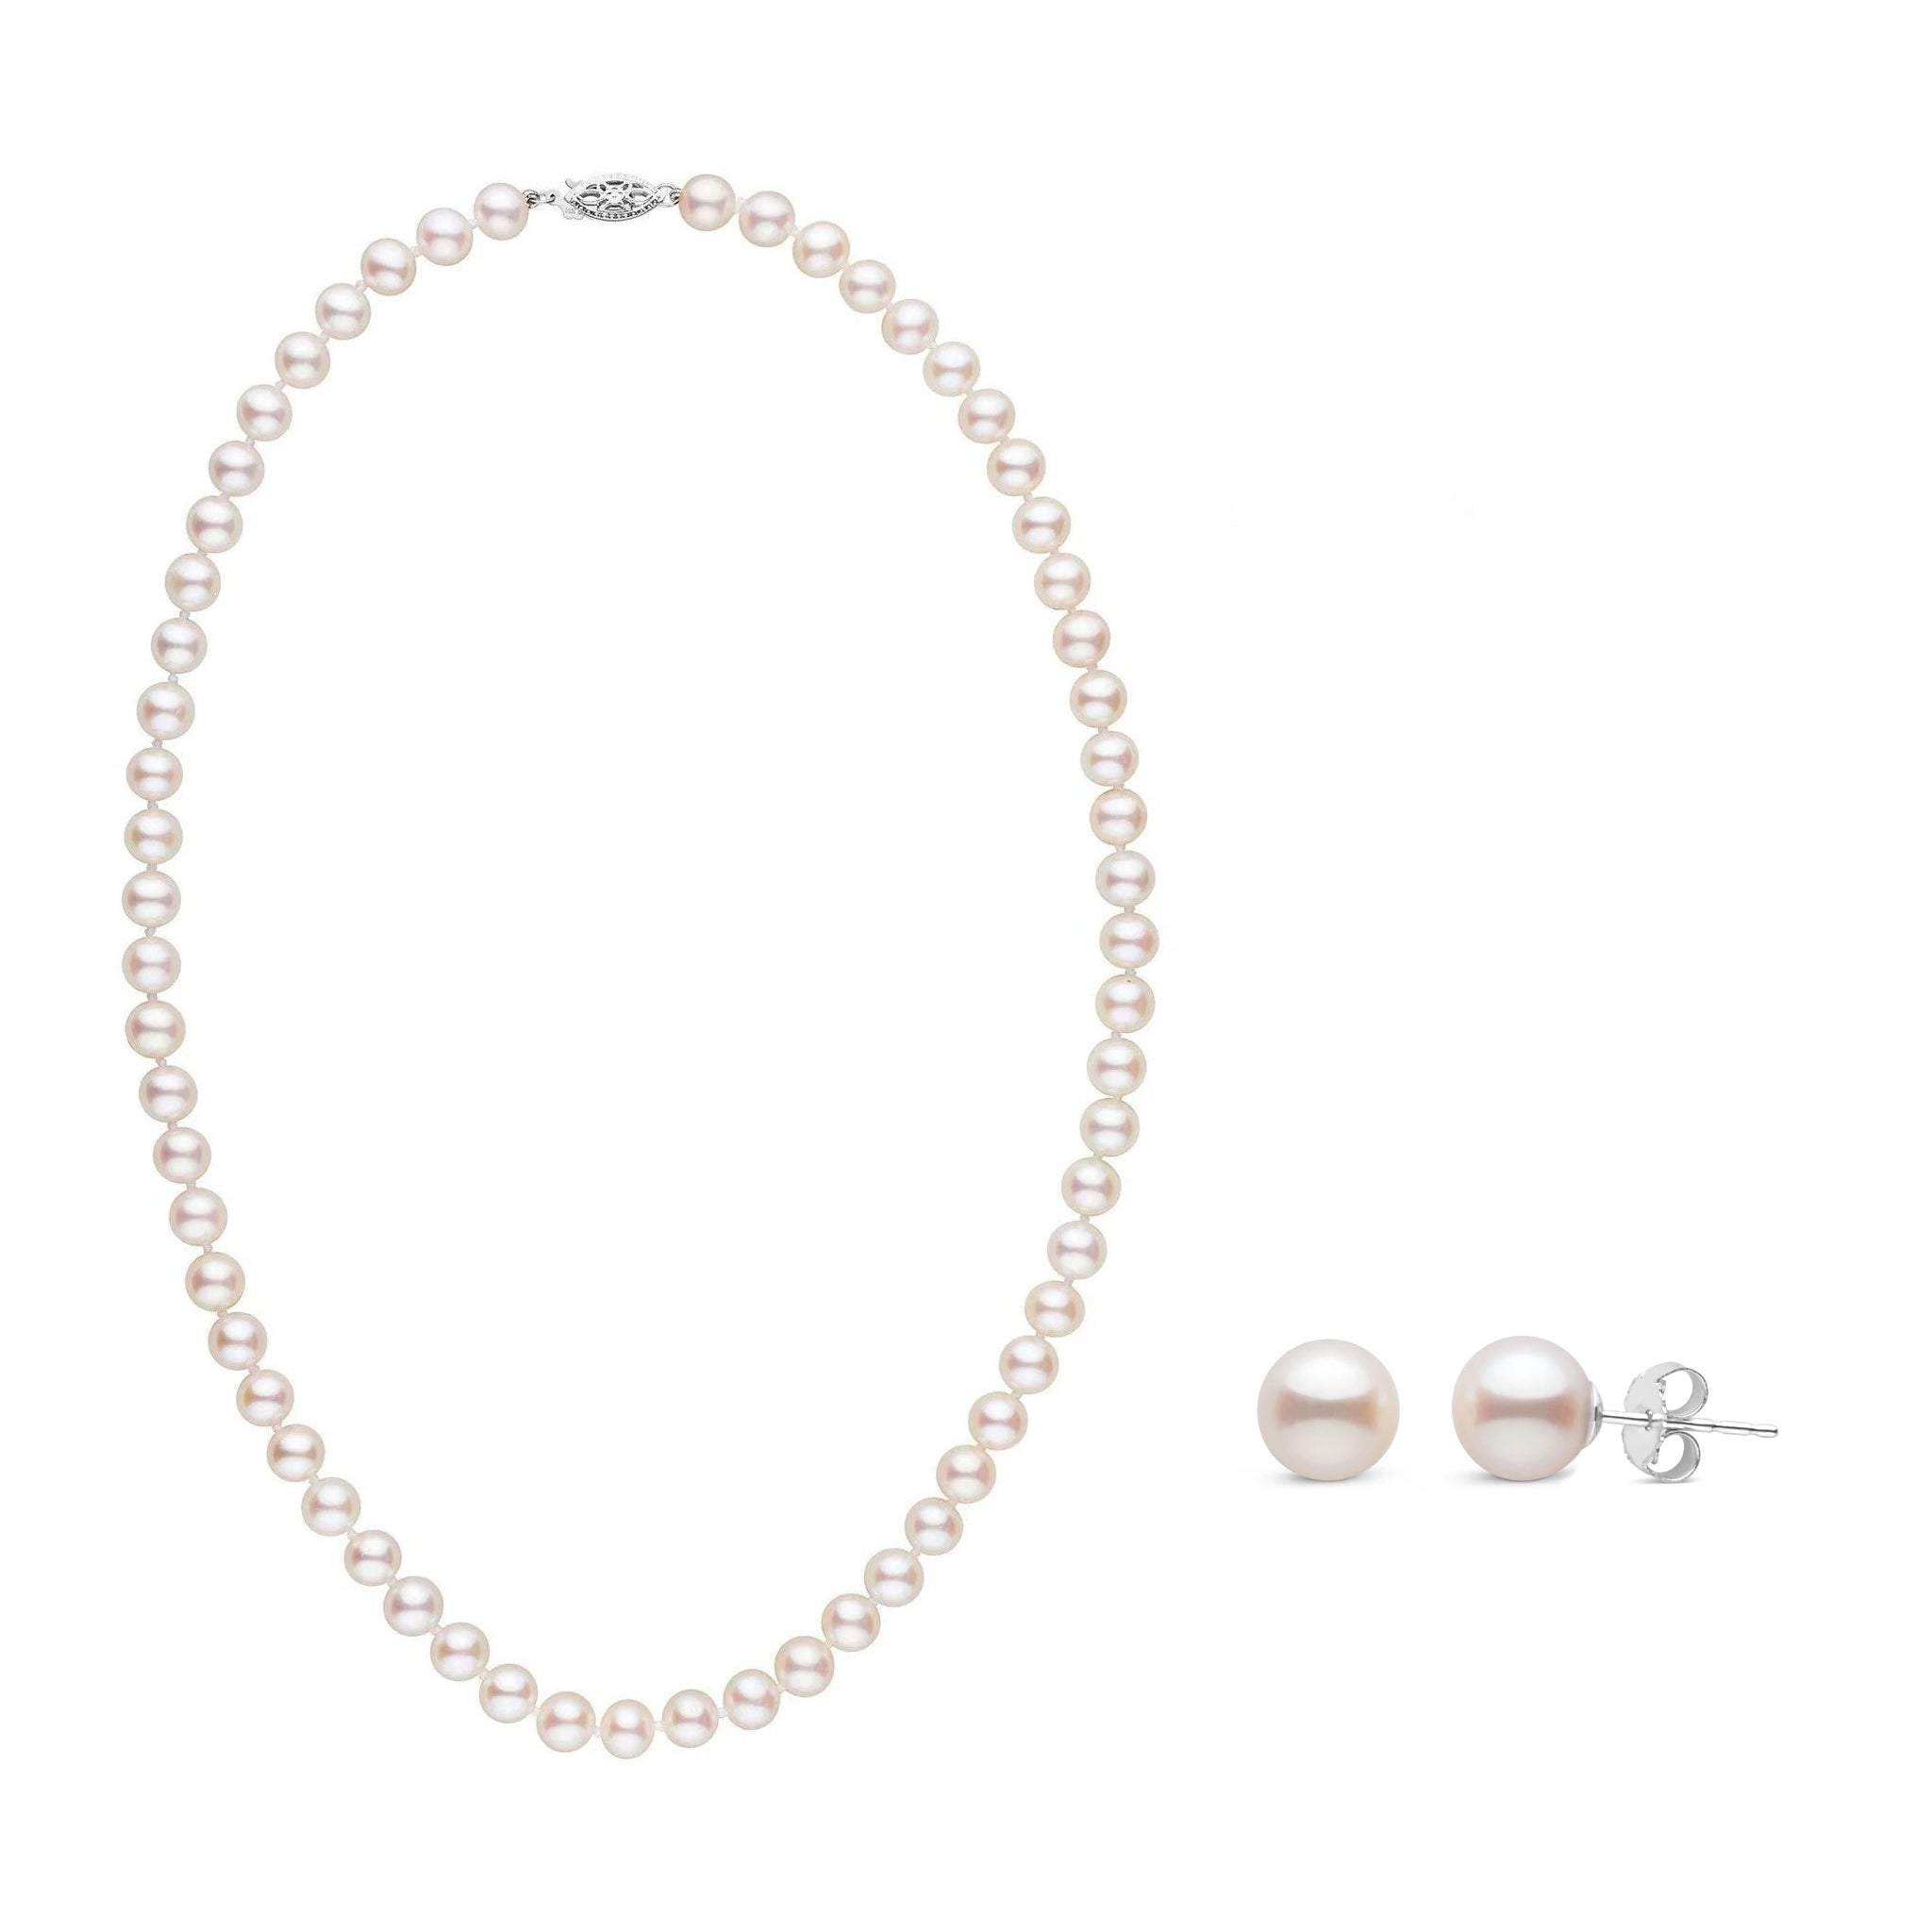 6.5-7.0 mm AAA White Freshwater Pearl 18 Inch Necklace and Stud Earring Set